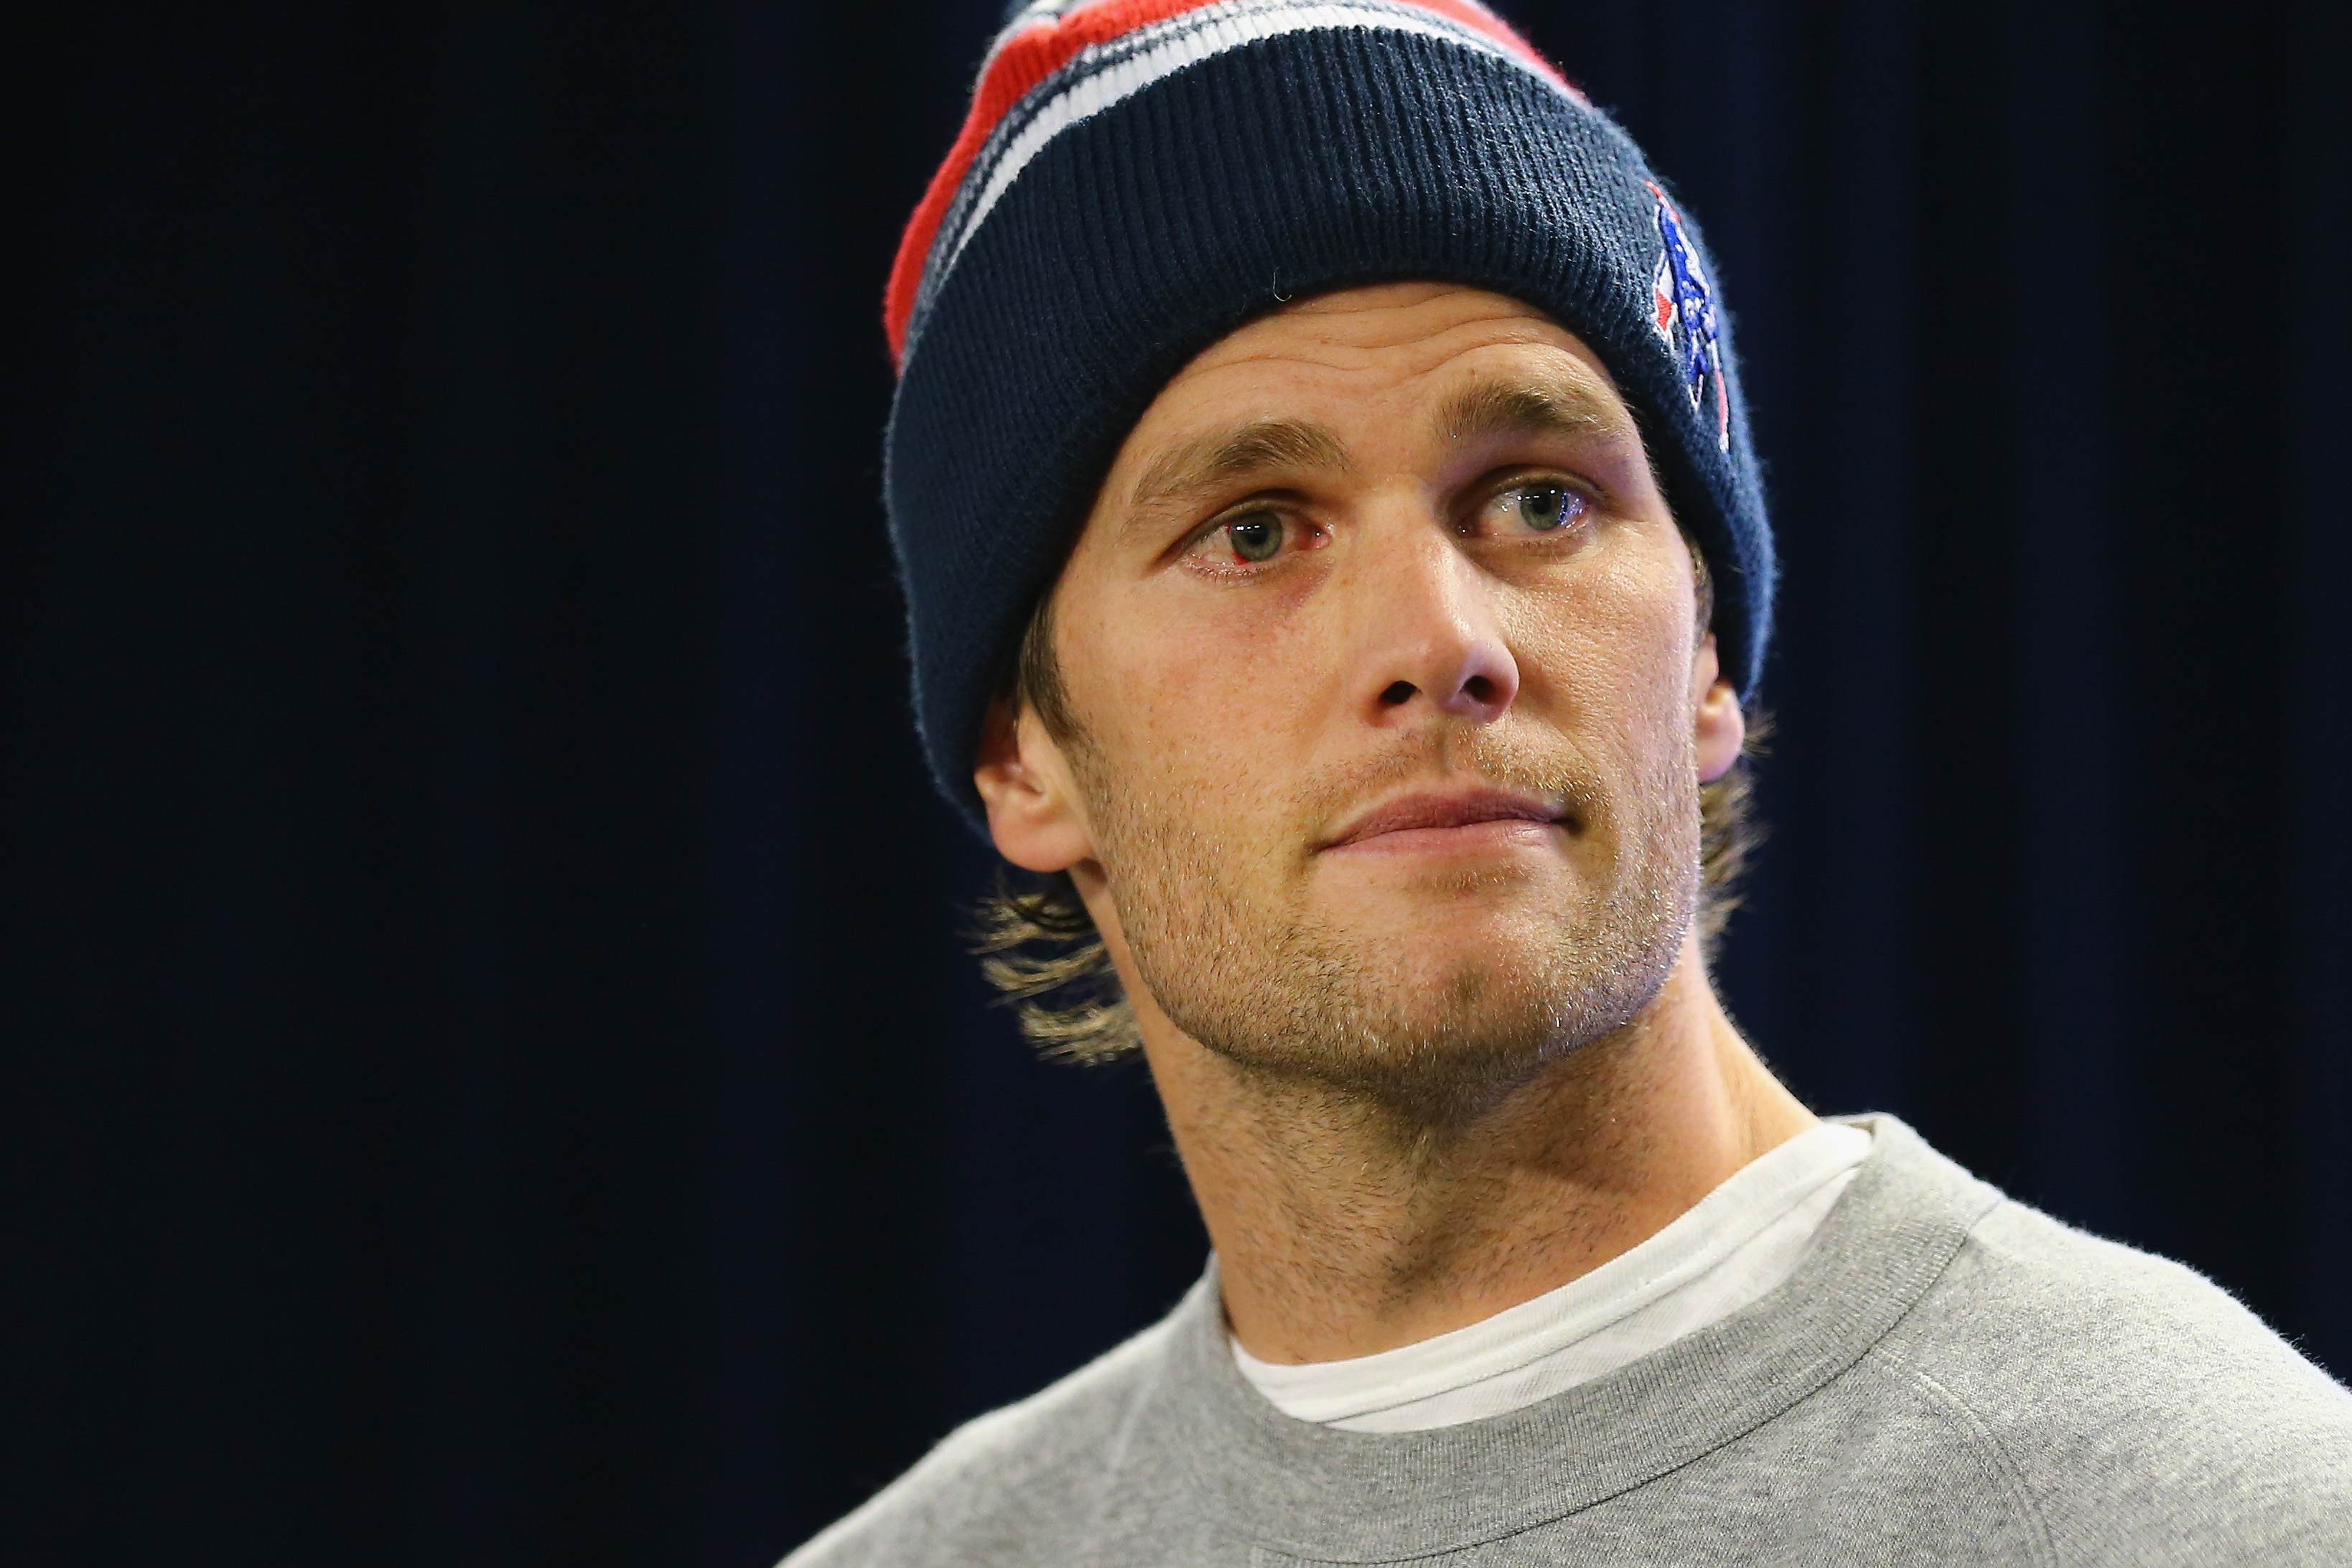 FOXBORO, MA - JANUARY 22: New England Patriots Quarterback Tom Brady talks to the media during a press conference to address the under inflation of footballs used in the AFC championship game at Gillette Stadium on January 22, 2015 in Foxboro, Massachusetts.  